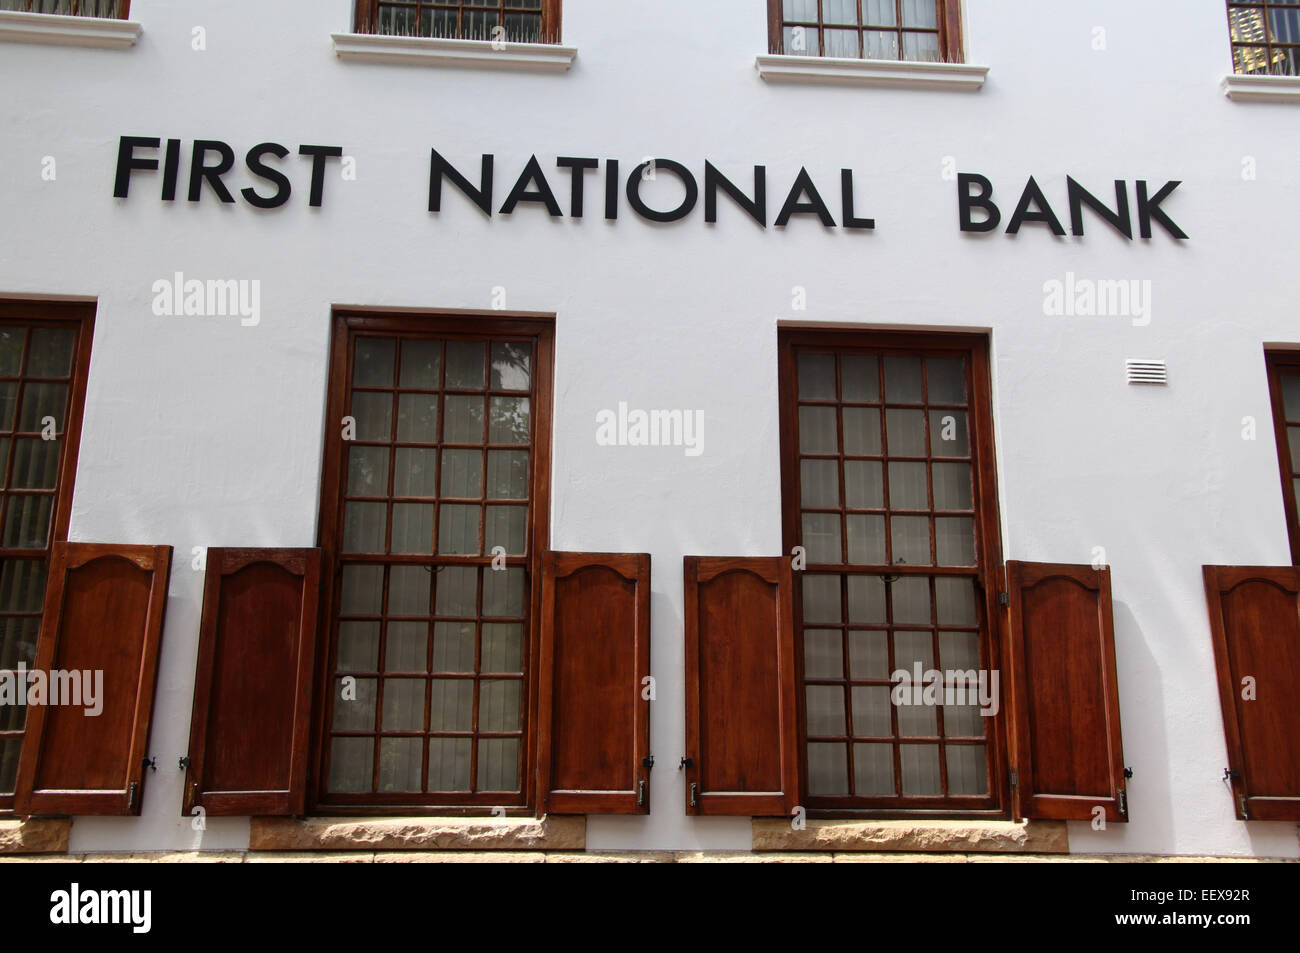 First National Bank at Stellenbosch in South Africa Stock Photo